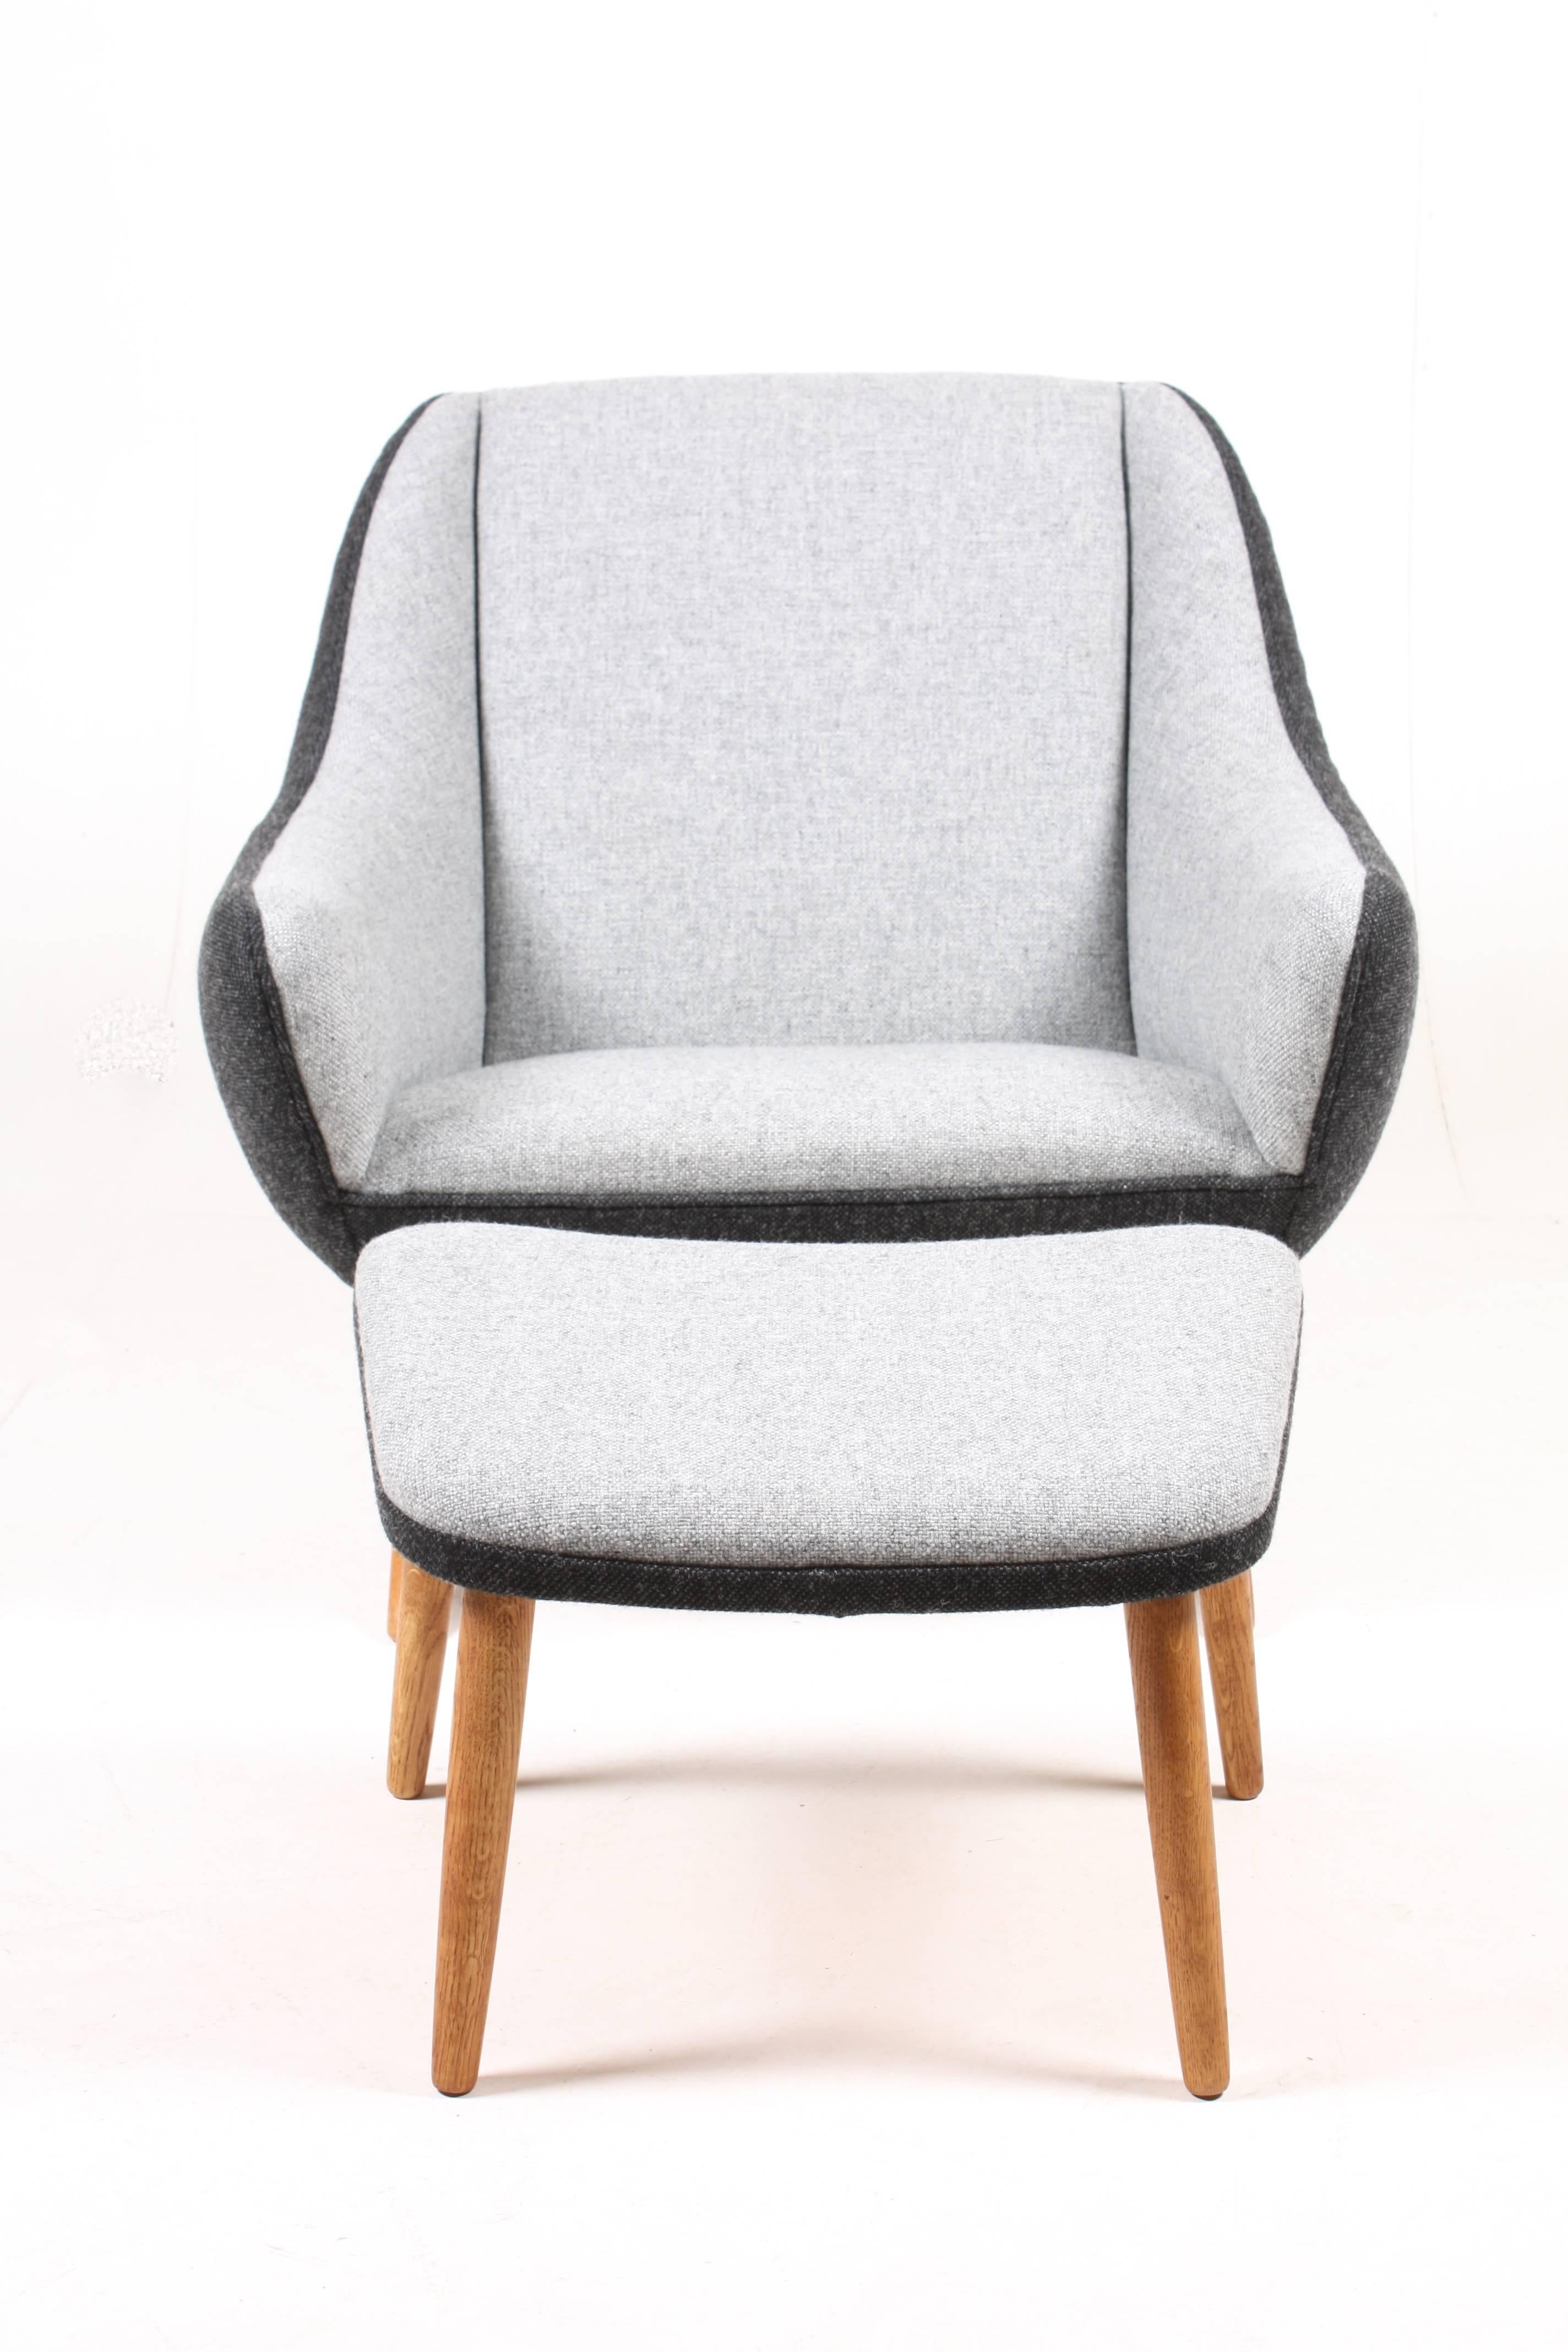 Mid-20th Century Midcentury Lounge Chair and Ottoman with New Kvadrat Fabric by Illum Willelsoe